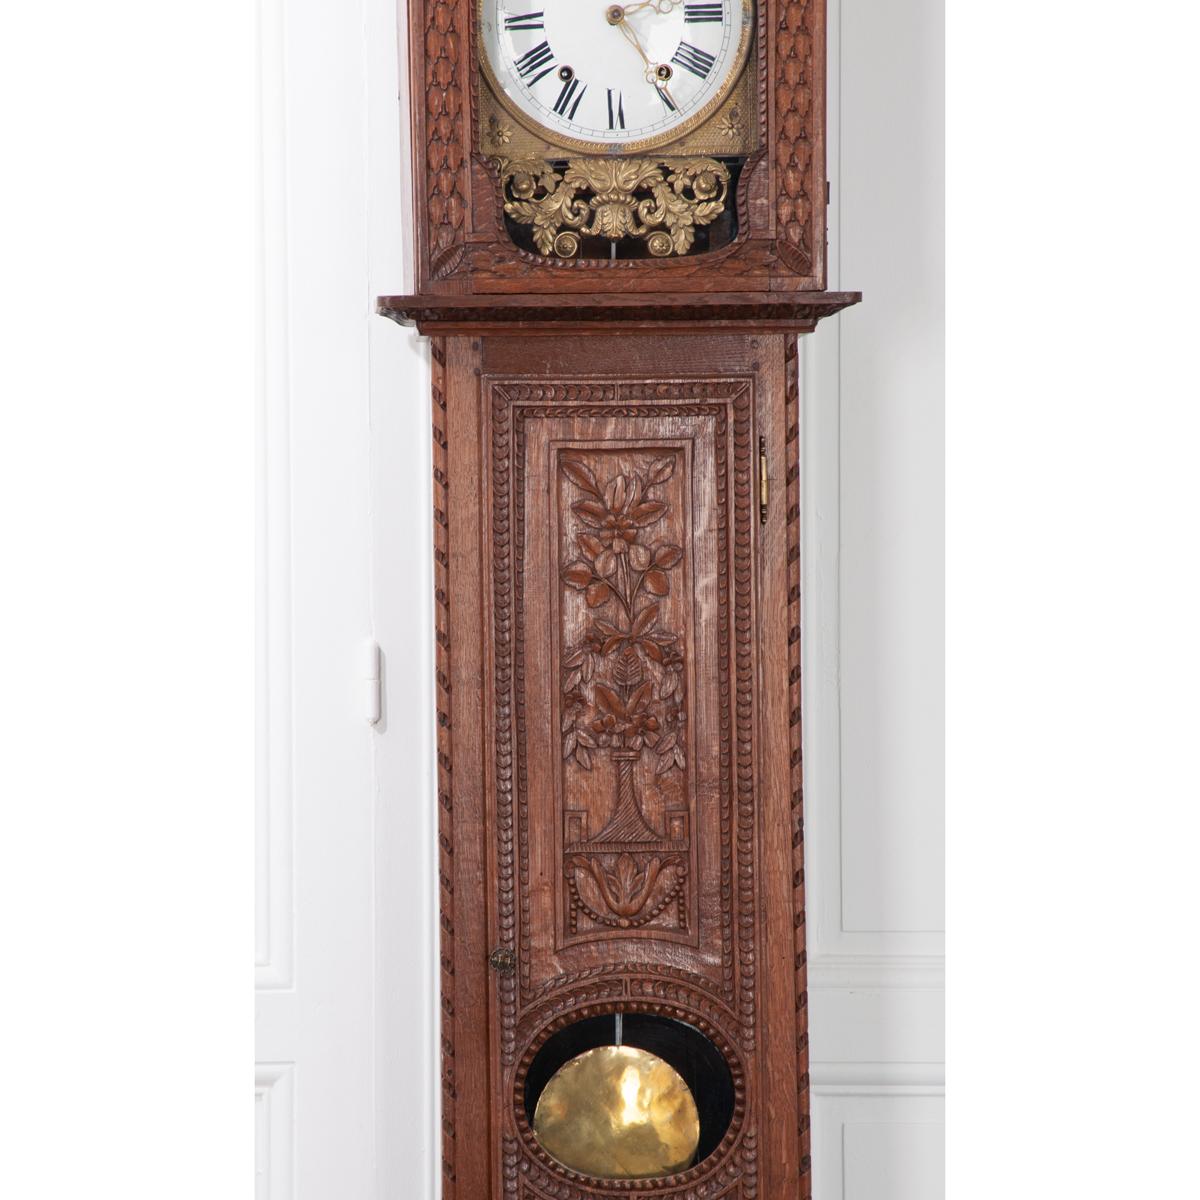 French 19th Century Provincial Horloge Case Clock In Good Condition For Sale In Baton Rouge, LA